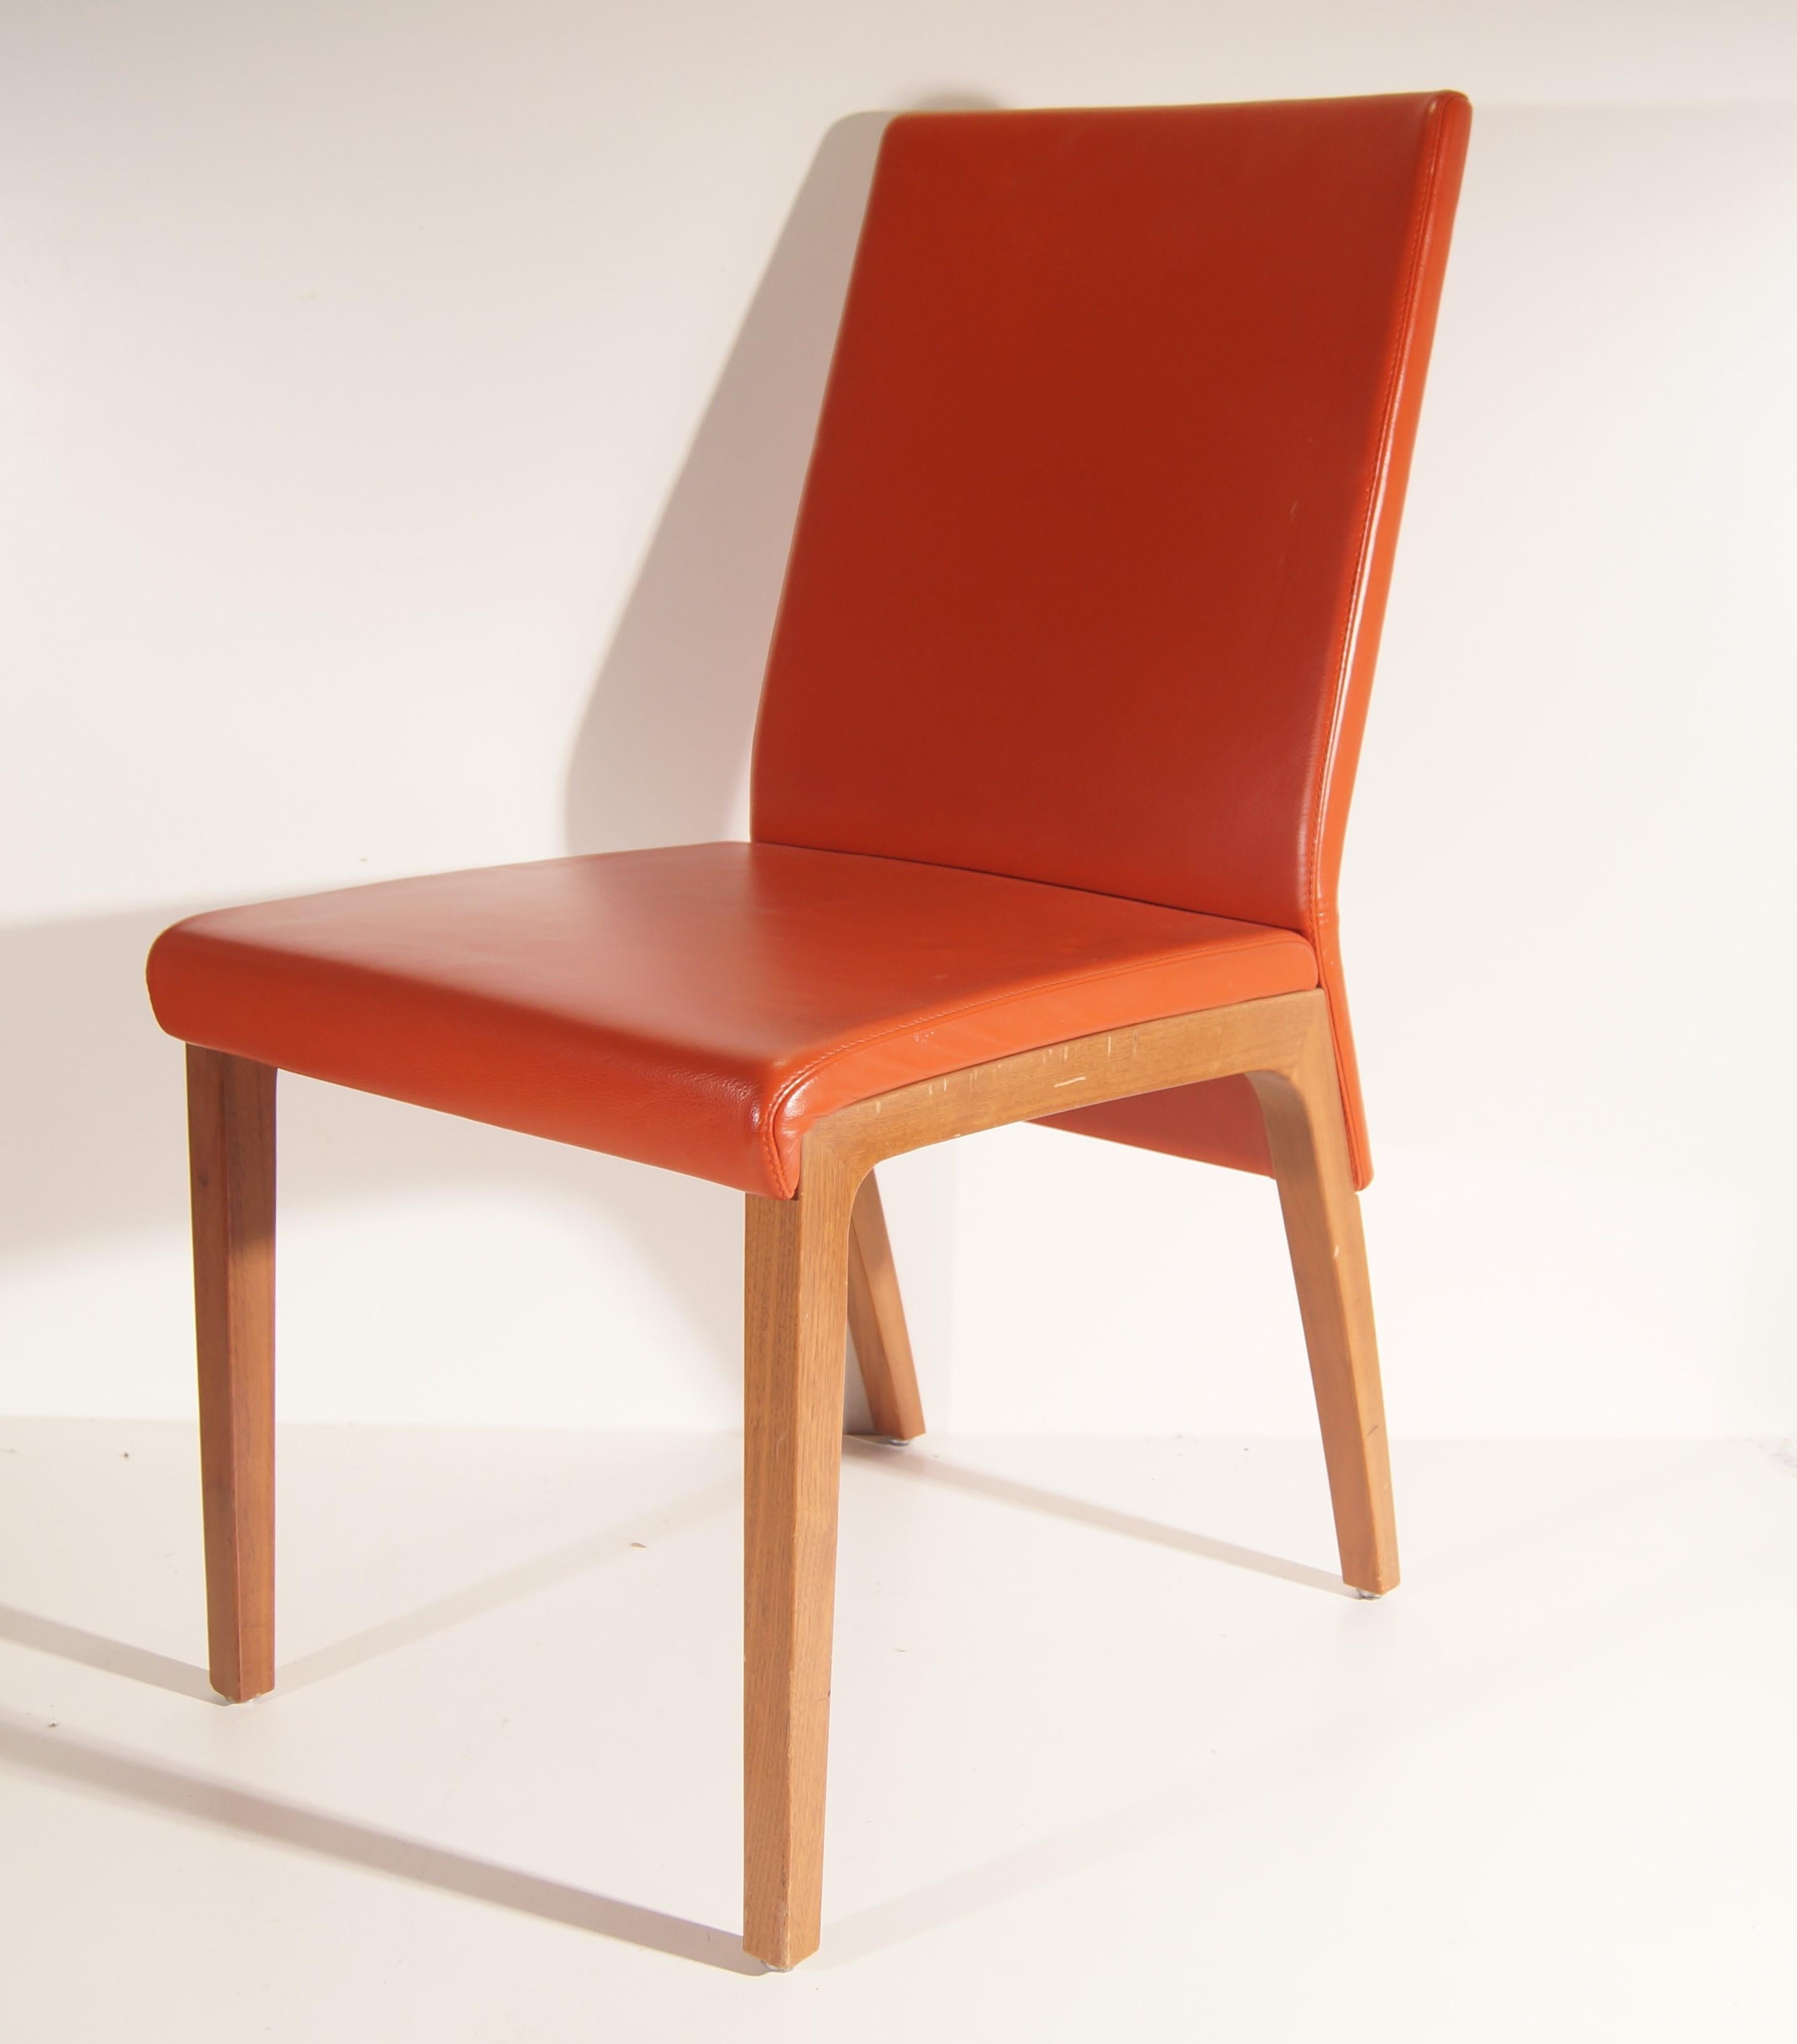 Rolf Benz - Dining room chair in orange leather 3